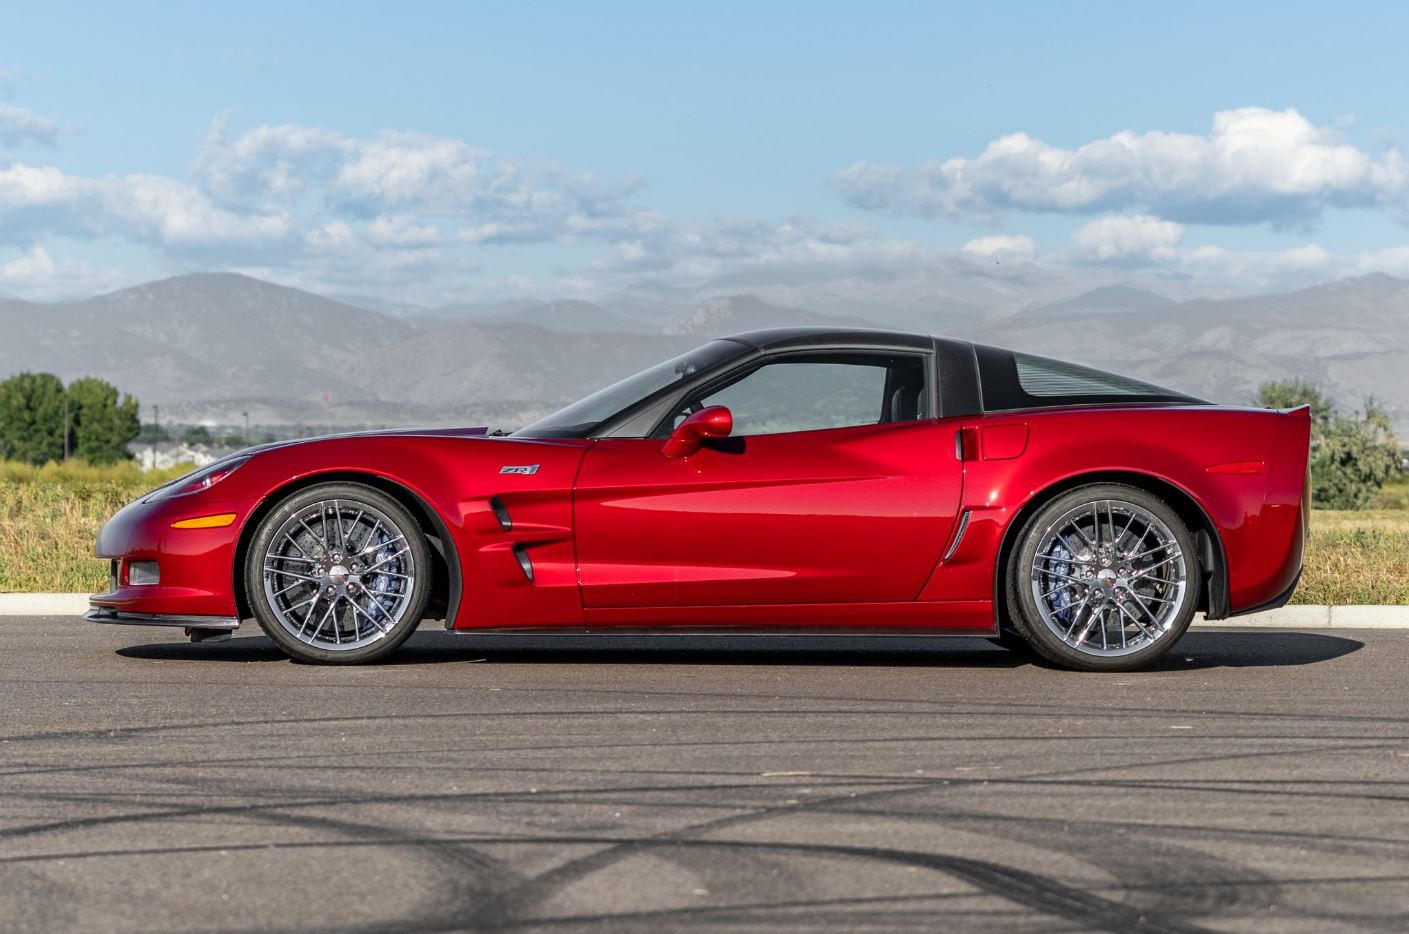 Corvette C6 Zr1 Will Supercharge Your Life With 638 Hp Get One While